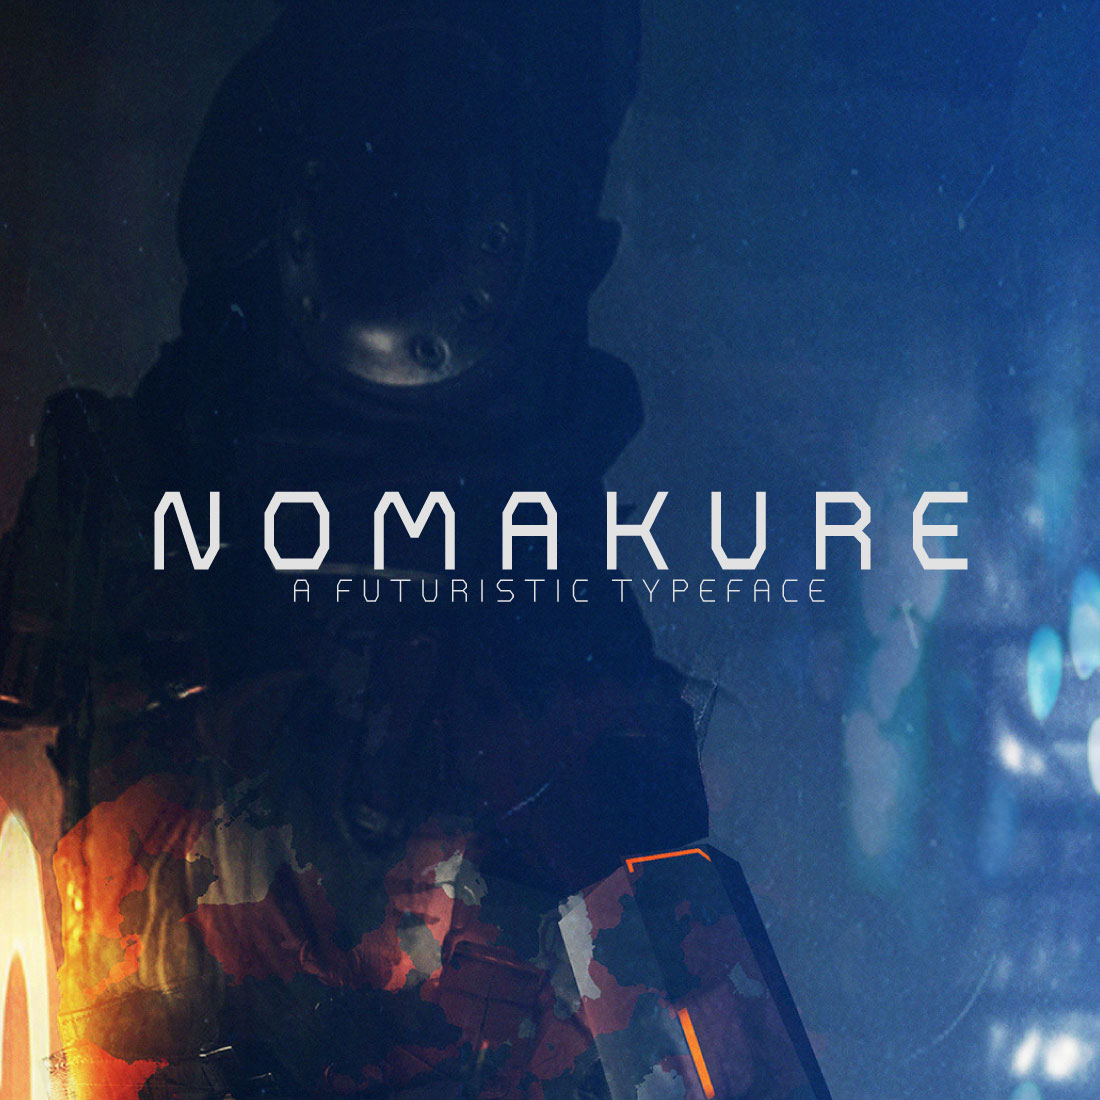 NOMAKURE FONT cover image.